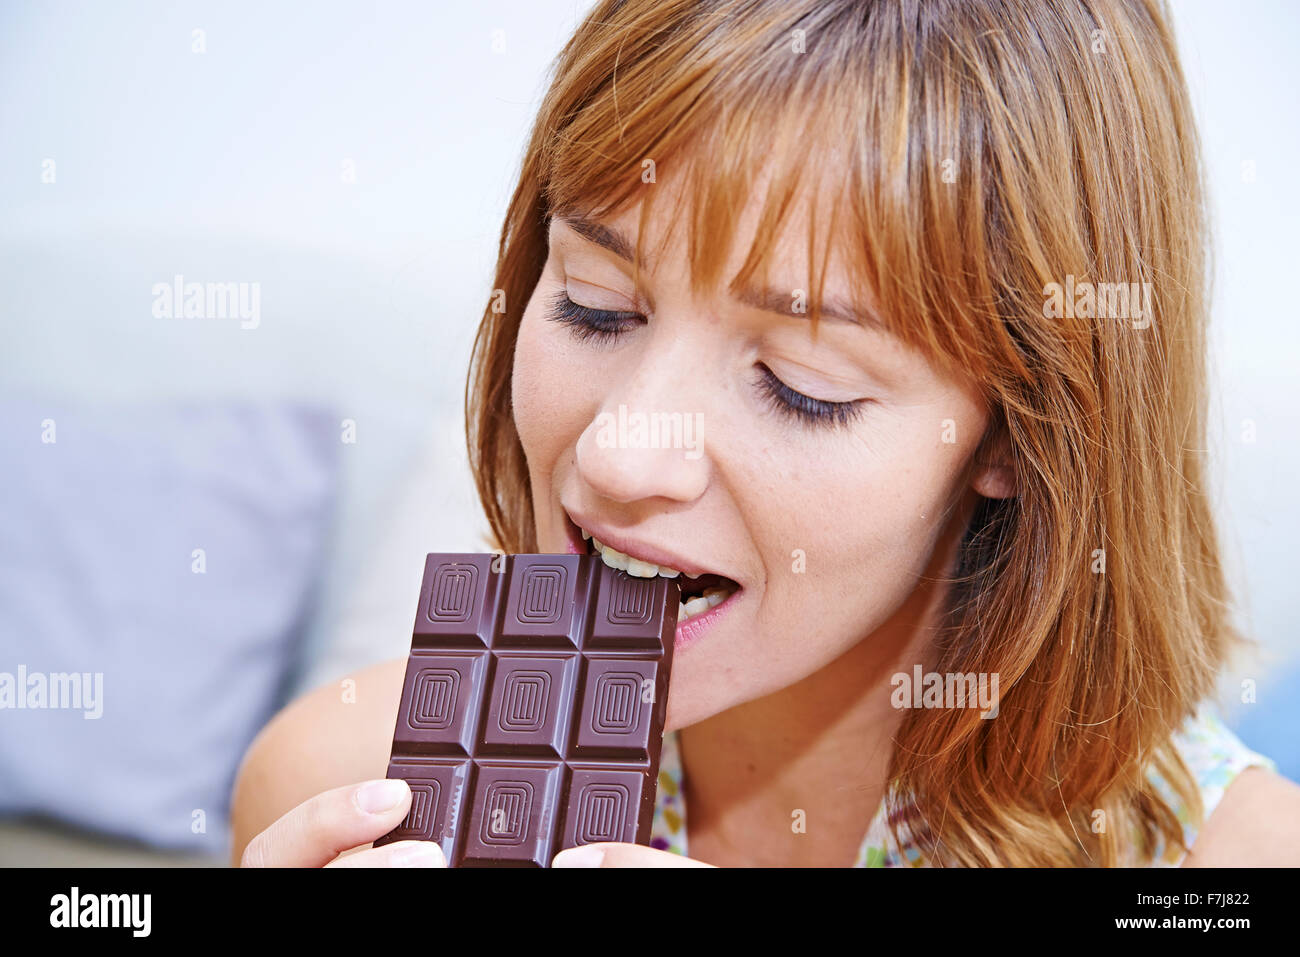 WOMAN EATING SWEETS Stock Photo